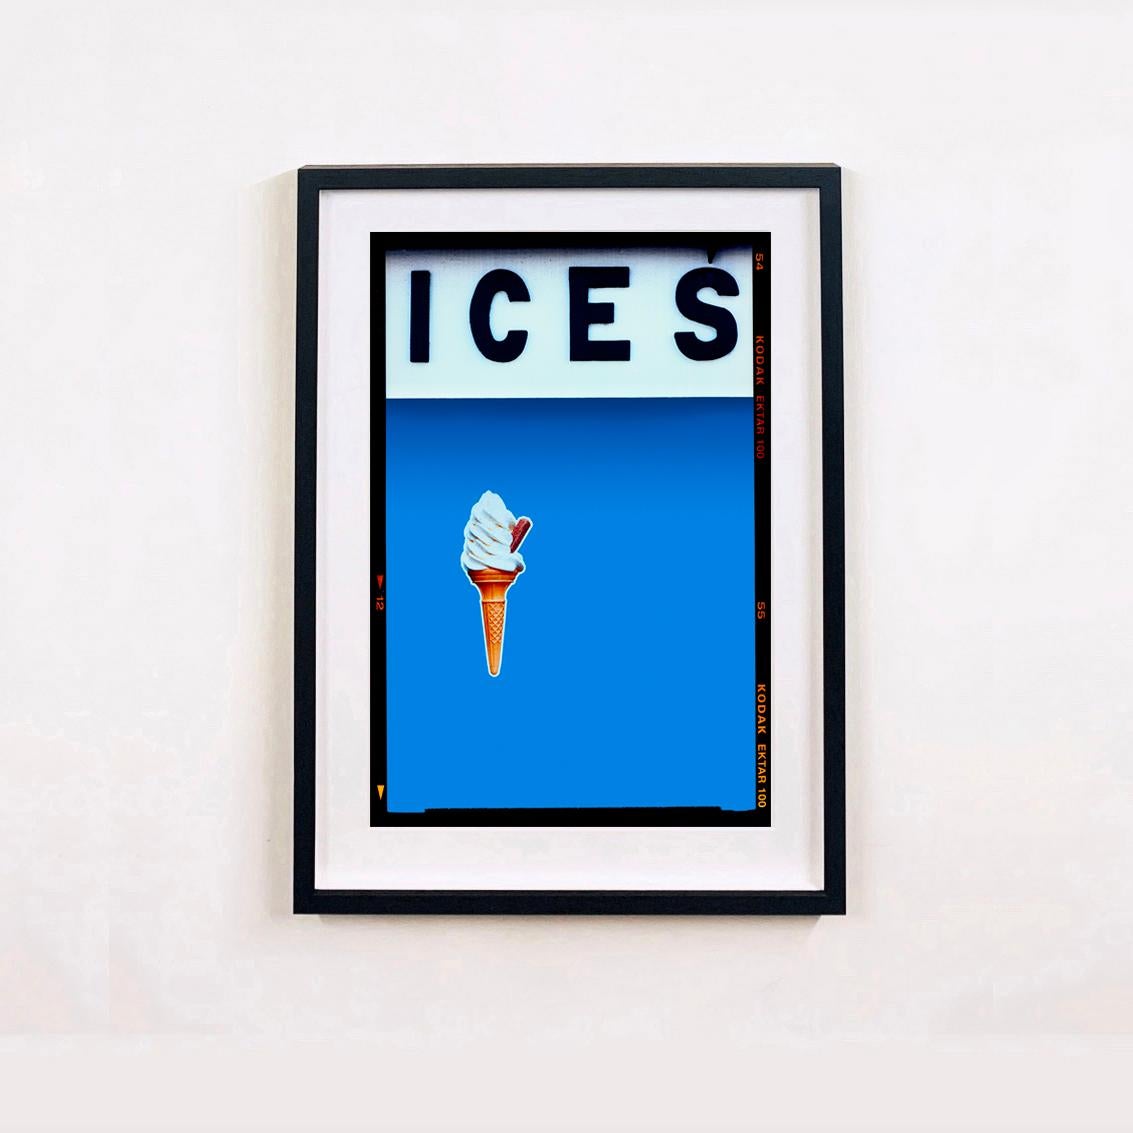 Ices (Sky Blue), Bexhill-on-Sea - British seaside color photography - Photograph by Richard Heeps